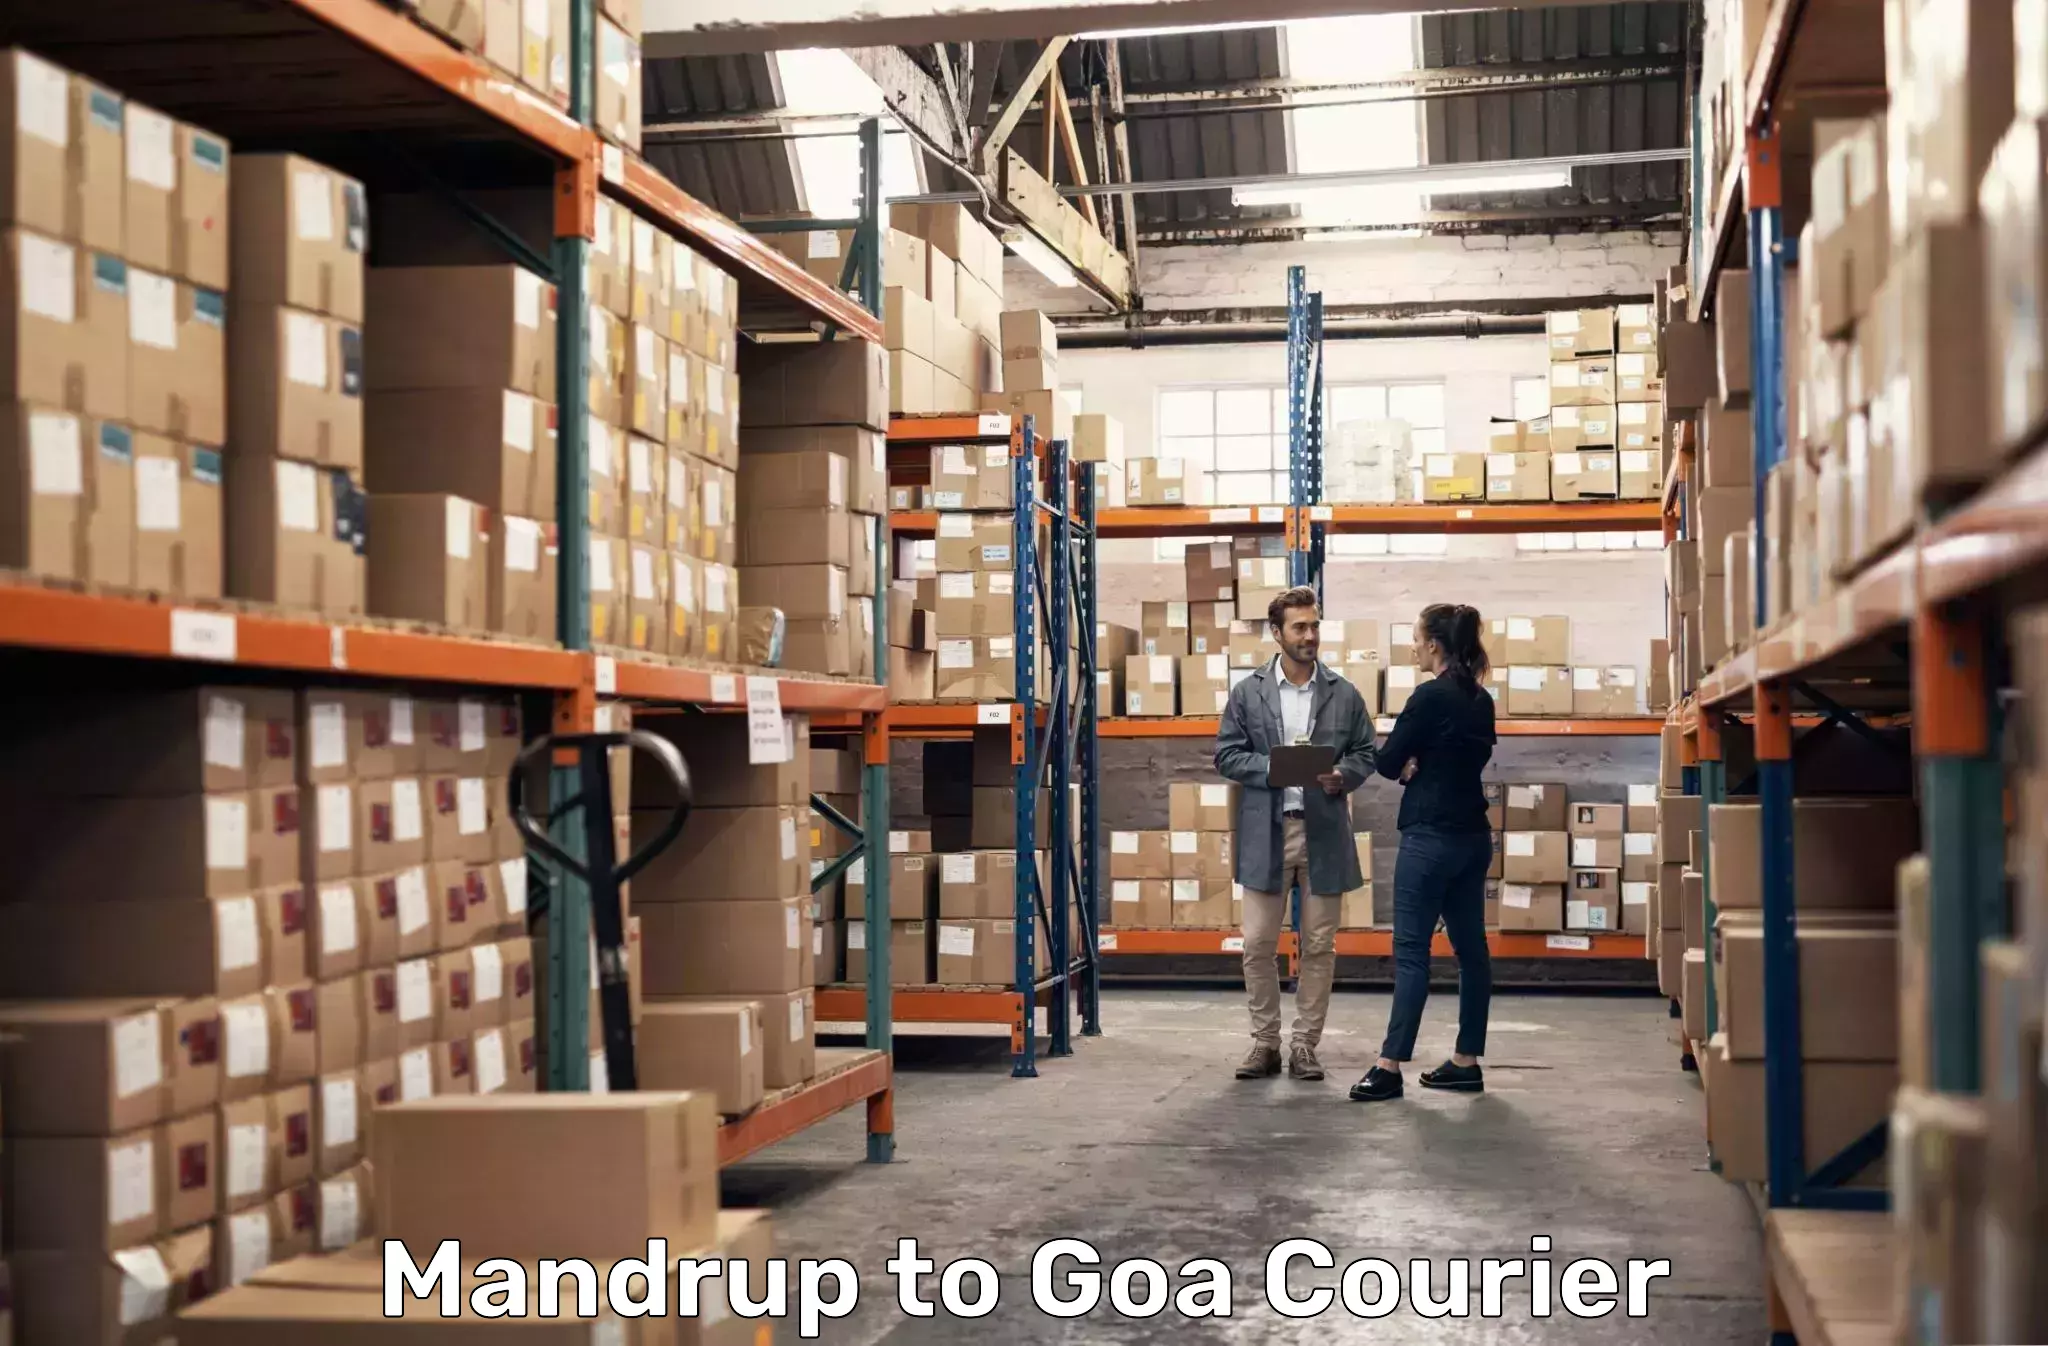 Local delivery service Mandrup to Goa